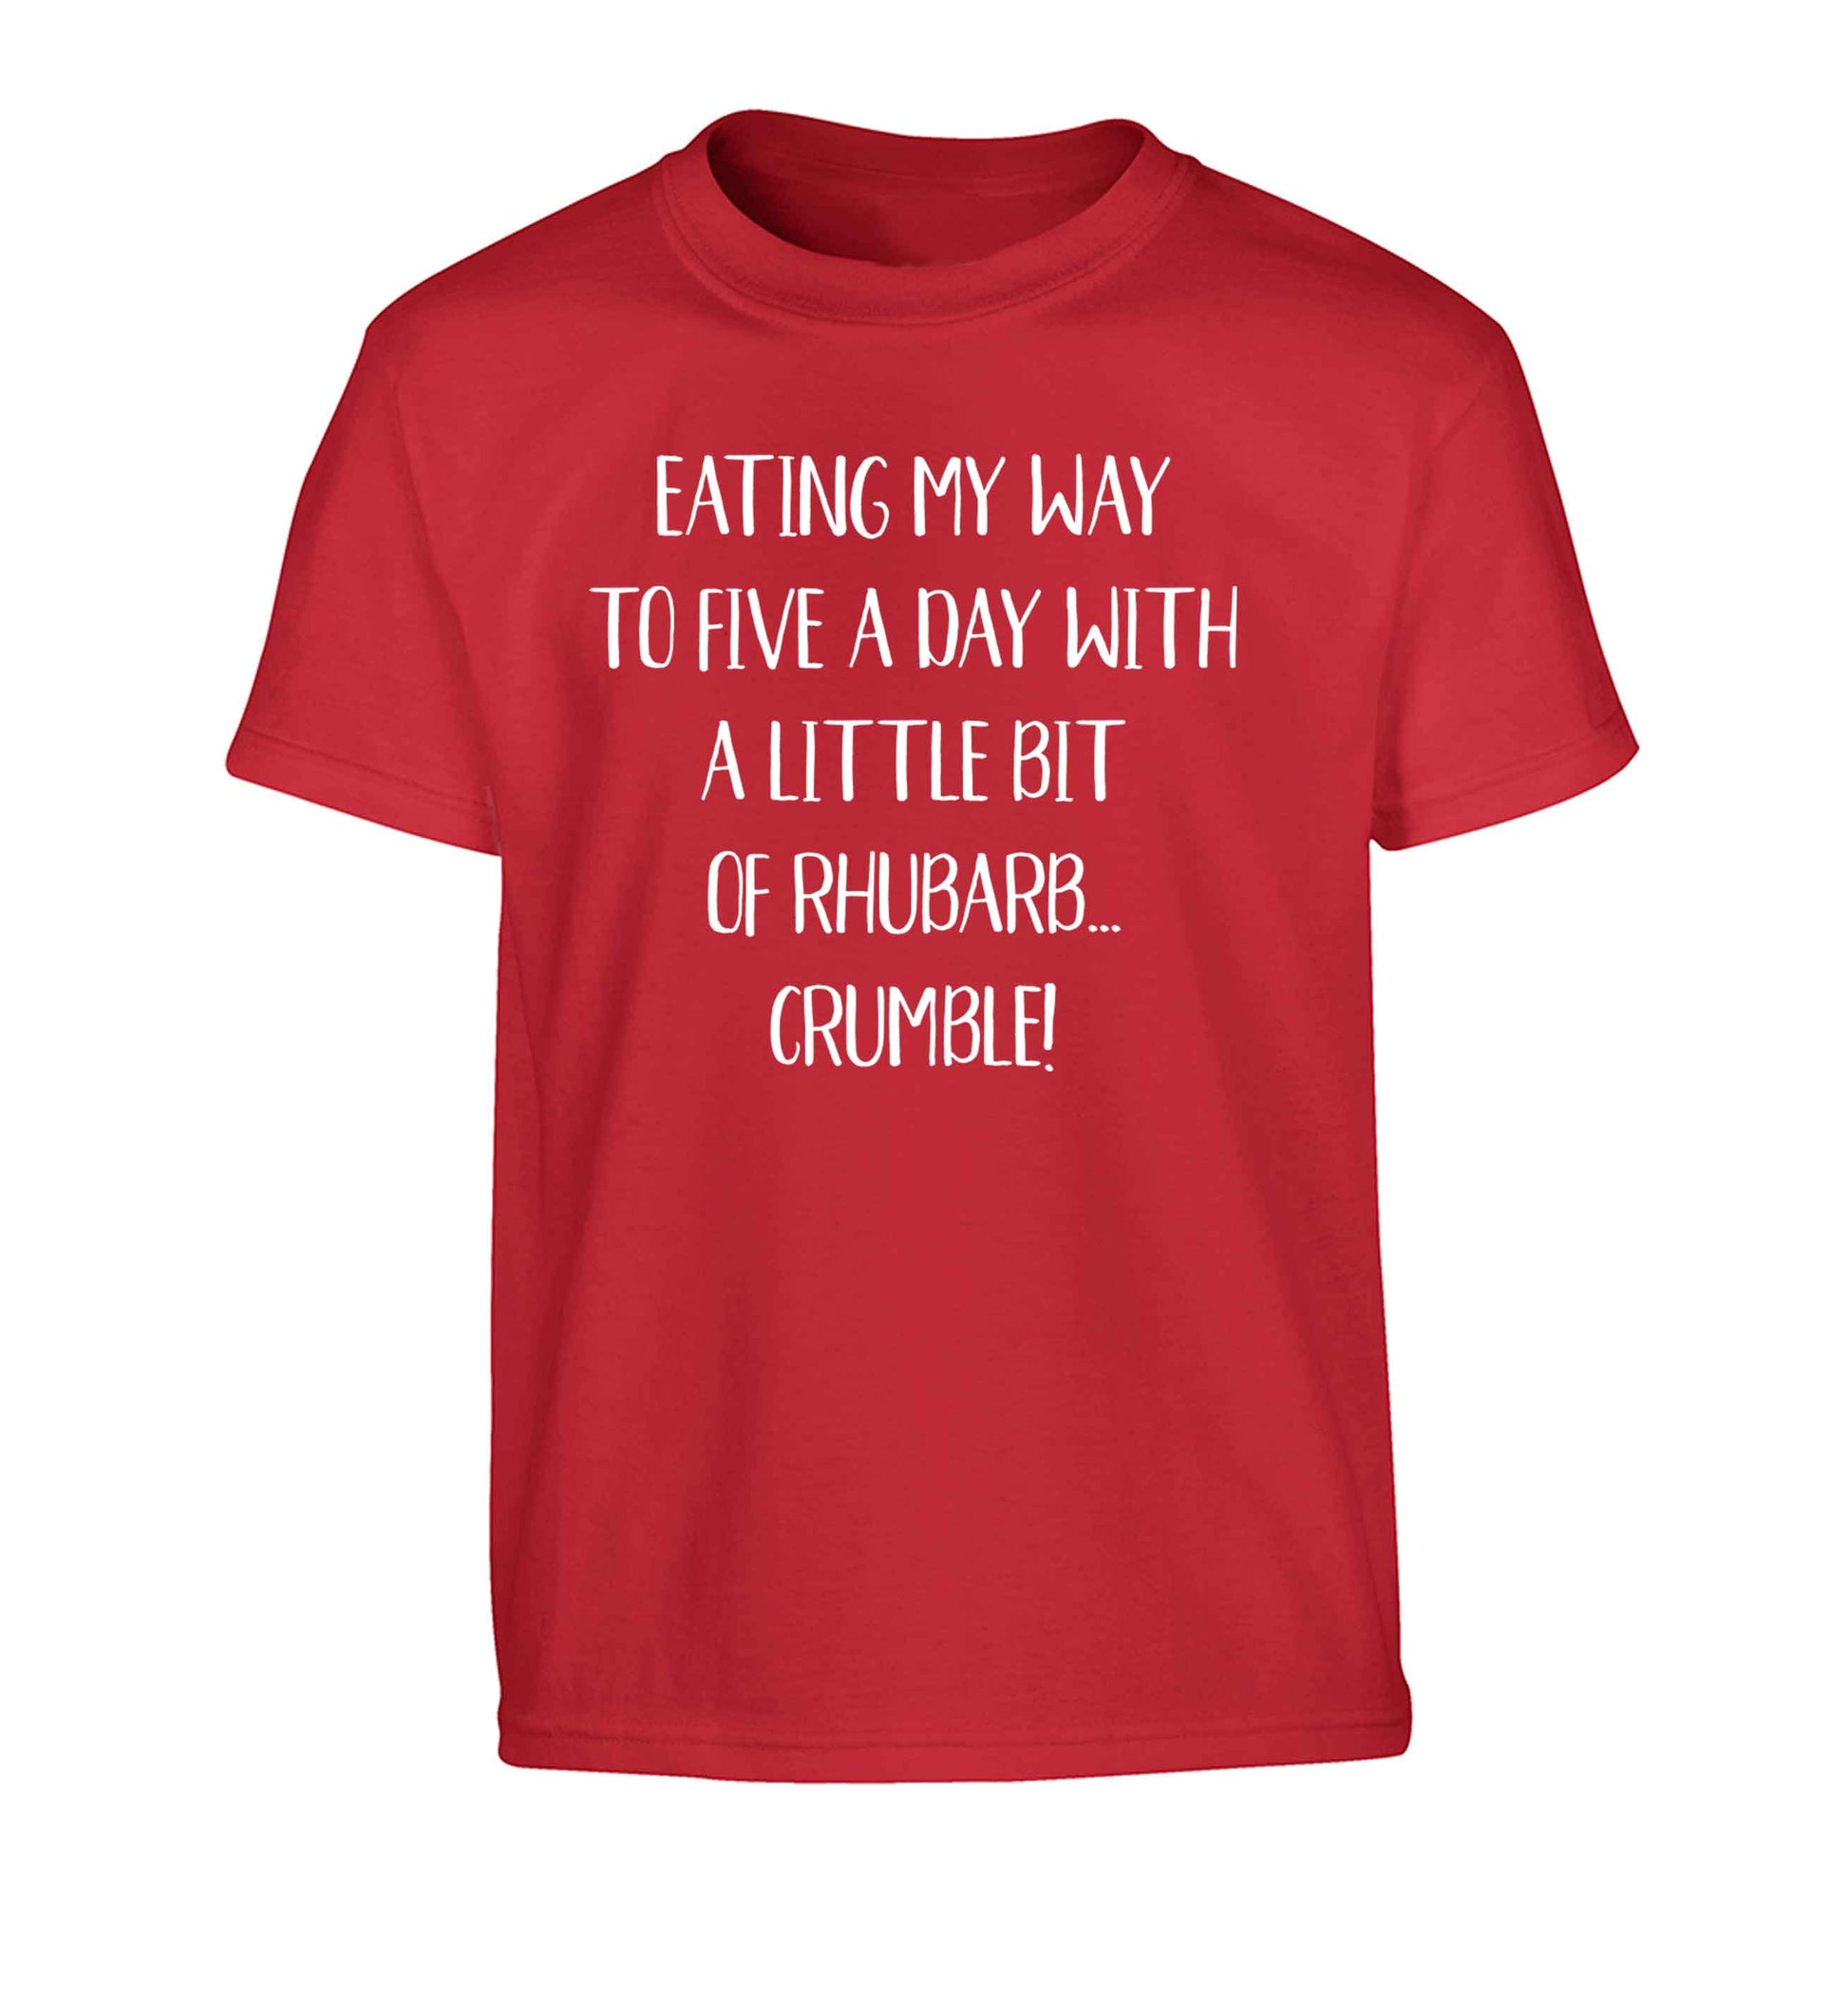 Eating my way to five a day with a little bit of rhubarb crumble Children's red Tshirt 12-13 Years